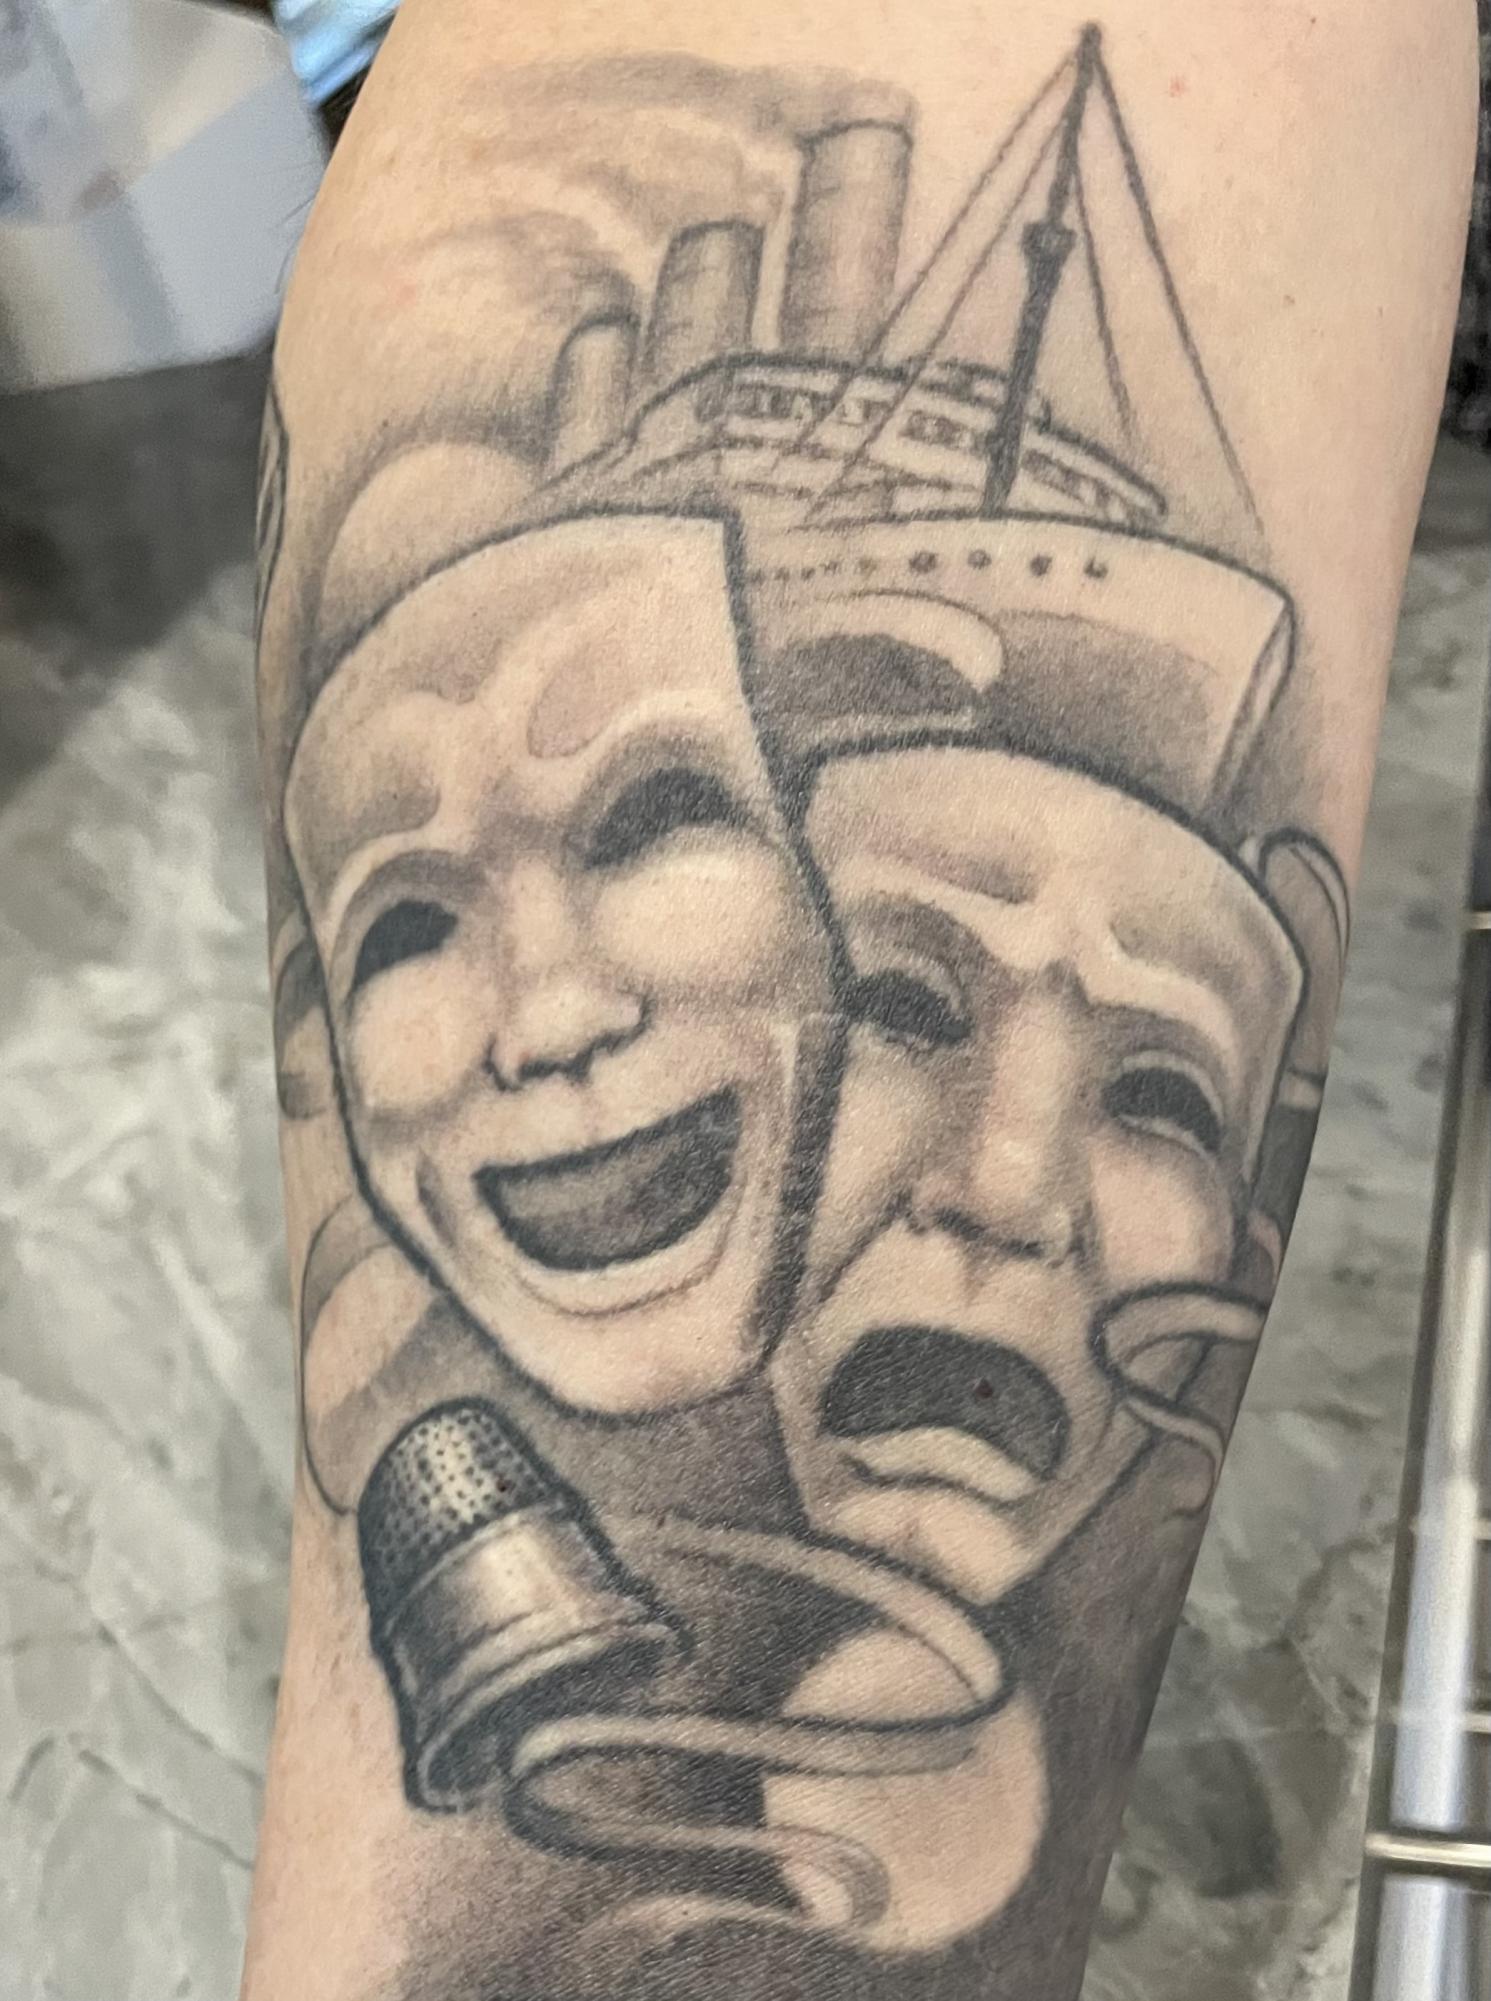 Theatre teacher Tony Kinneys first tattoo features the comedy and drama theatre masks along with a passenger ship and thimble. The ship represents Anything Goes, the first musical he directed for LHS while the thimble represents the musical Peter Pan, which he directed for Logansport Junior Civic Theatre.